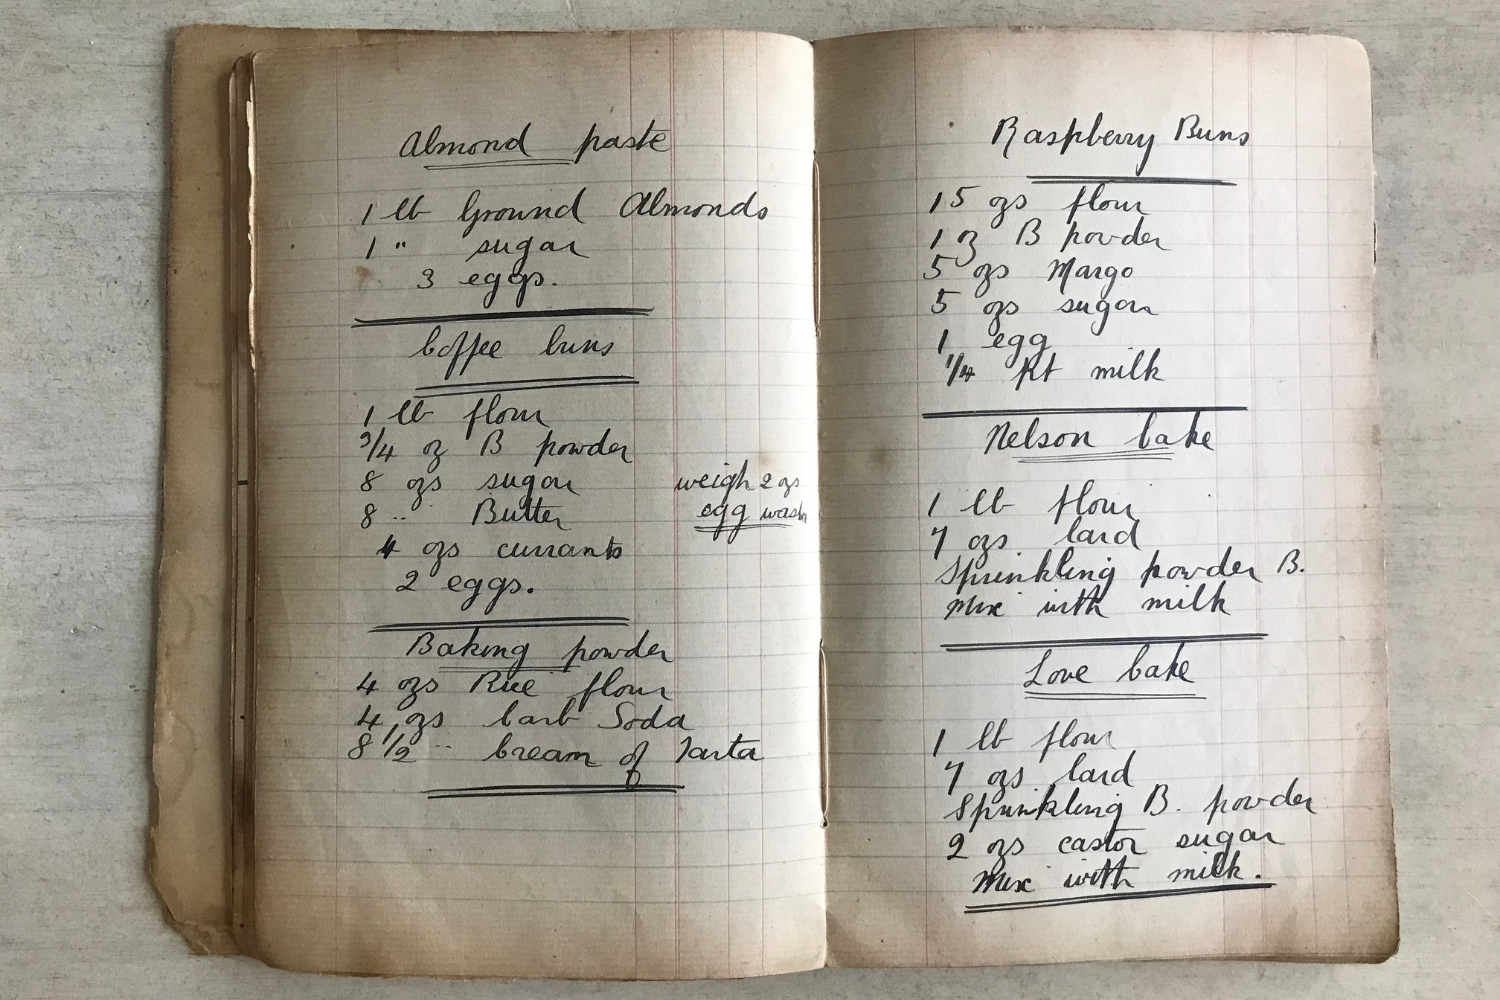 A handwritten recipe book lays open flat on a white table, showing both left and right pages of the book. The cursive text is written in thin black ink. On the lefthand page, from top to bottom, are recipes for almond paste, coffee buns and baking powder. On the righthand page, from top to bottom, are recipes for raspberry buns, Nelson bake and love bake.